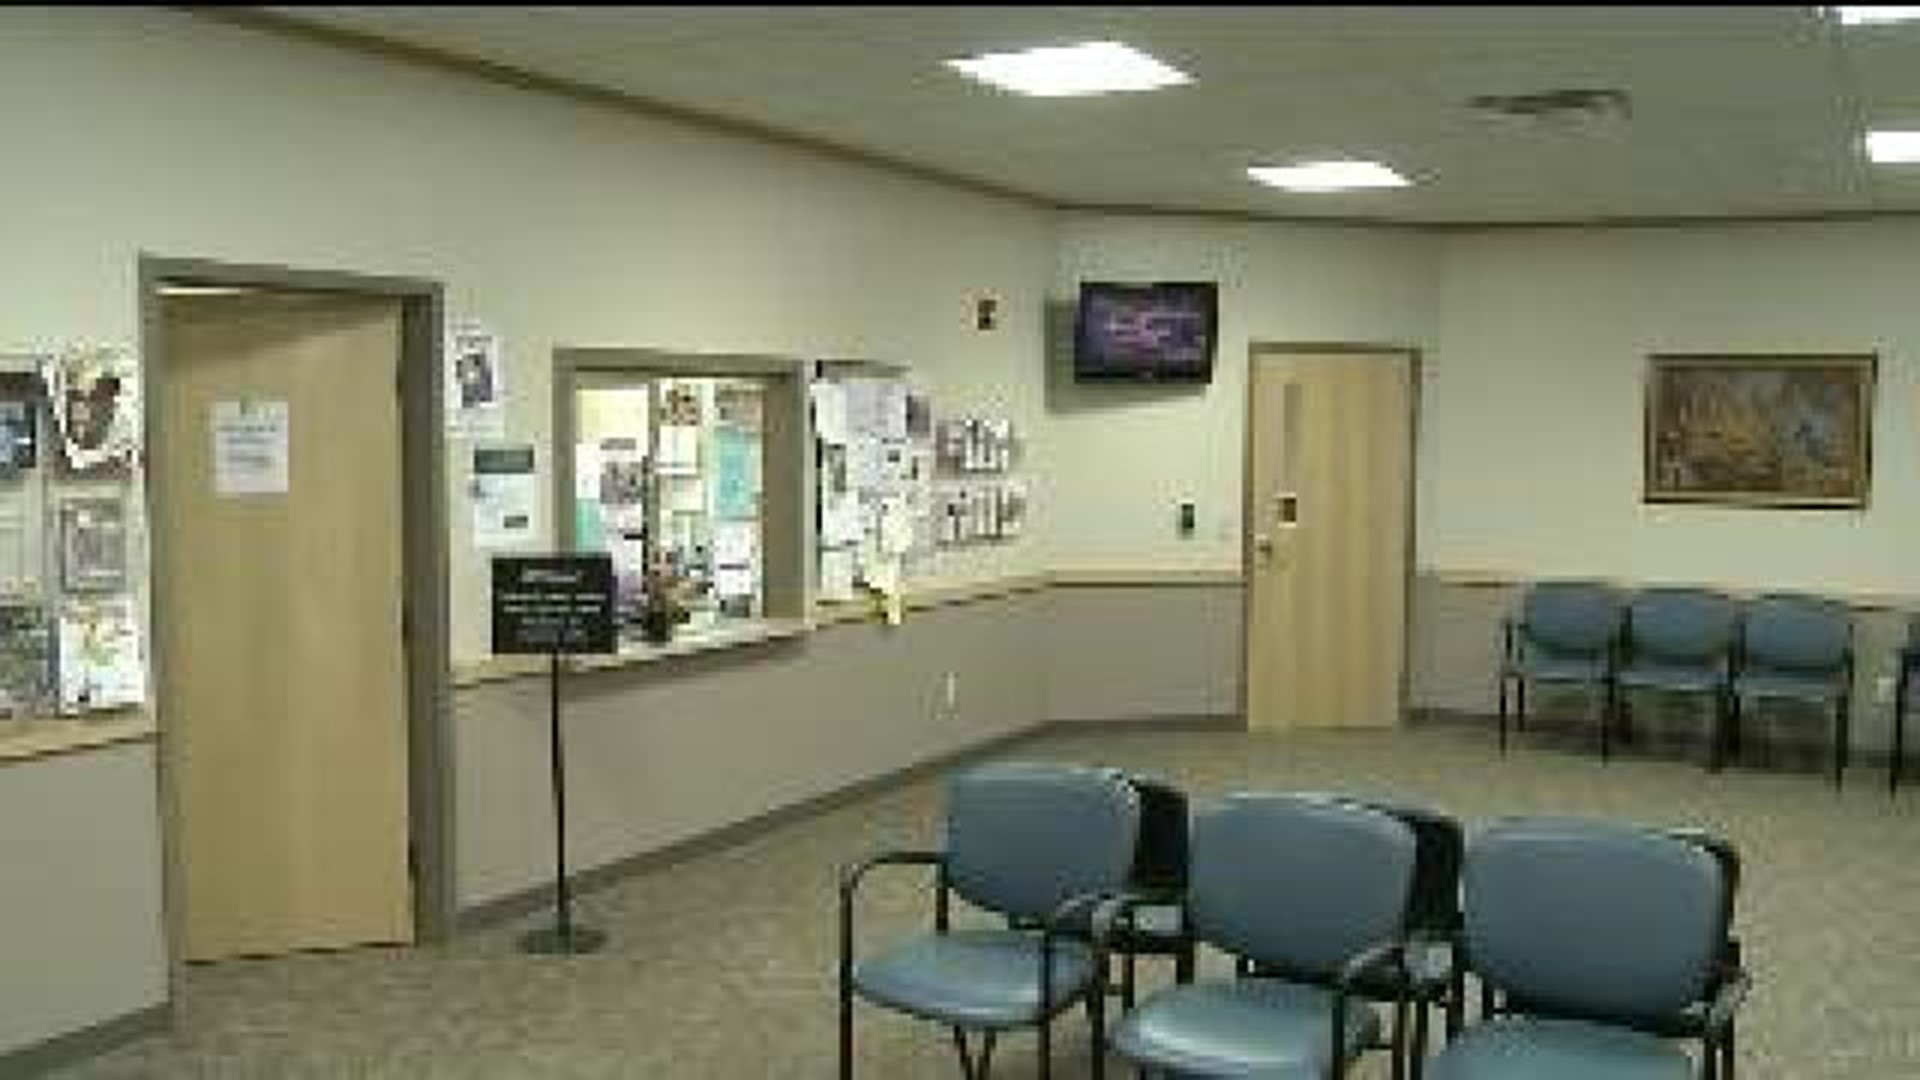 Veterans to Get Clinic Closer to Home